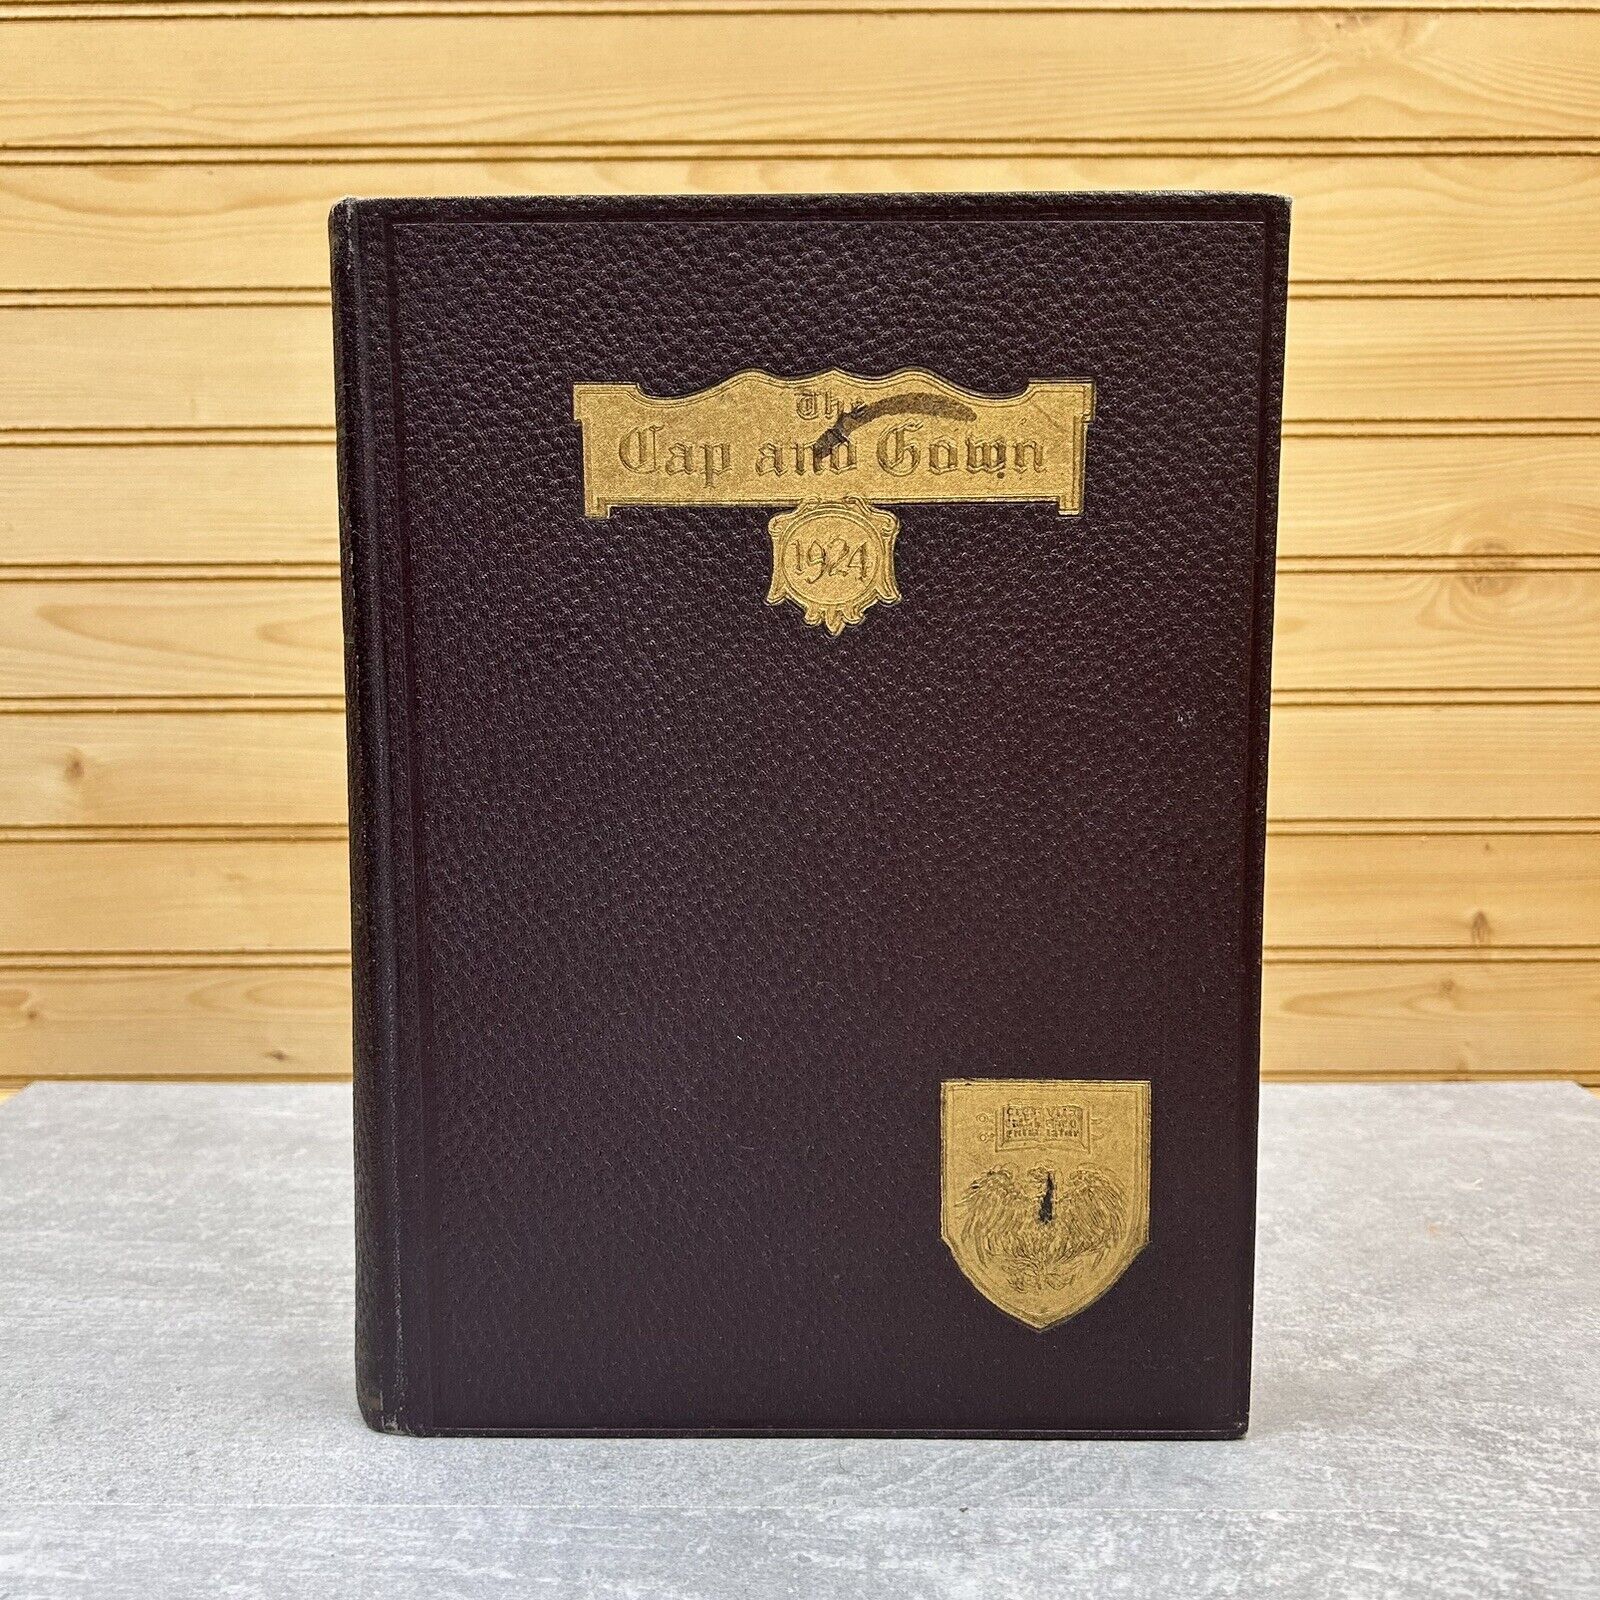 1924 The Cap and Gown University of Chicago Yearbook 100 Year Anniversary